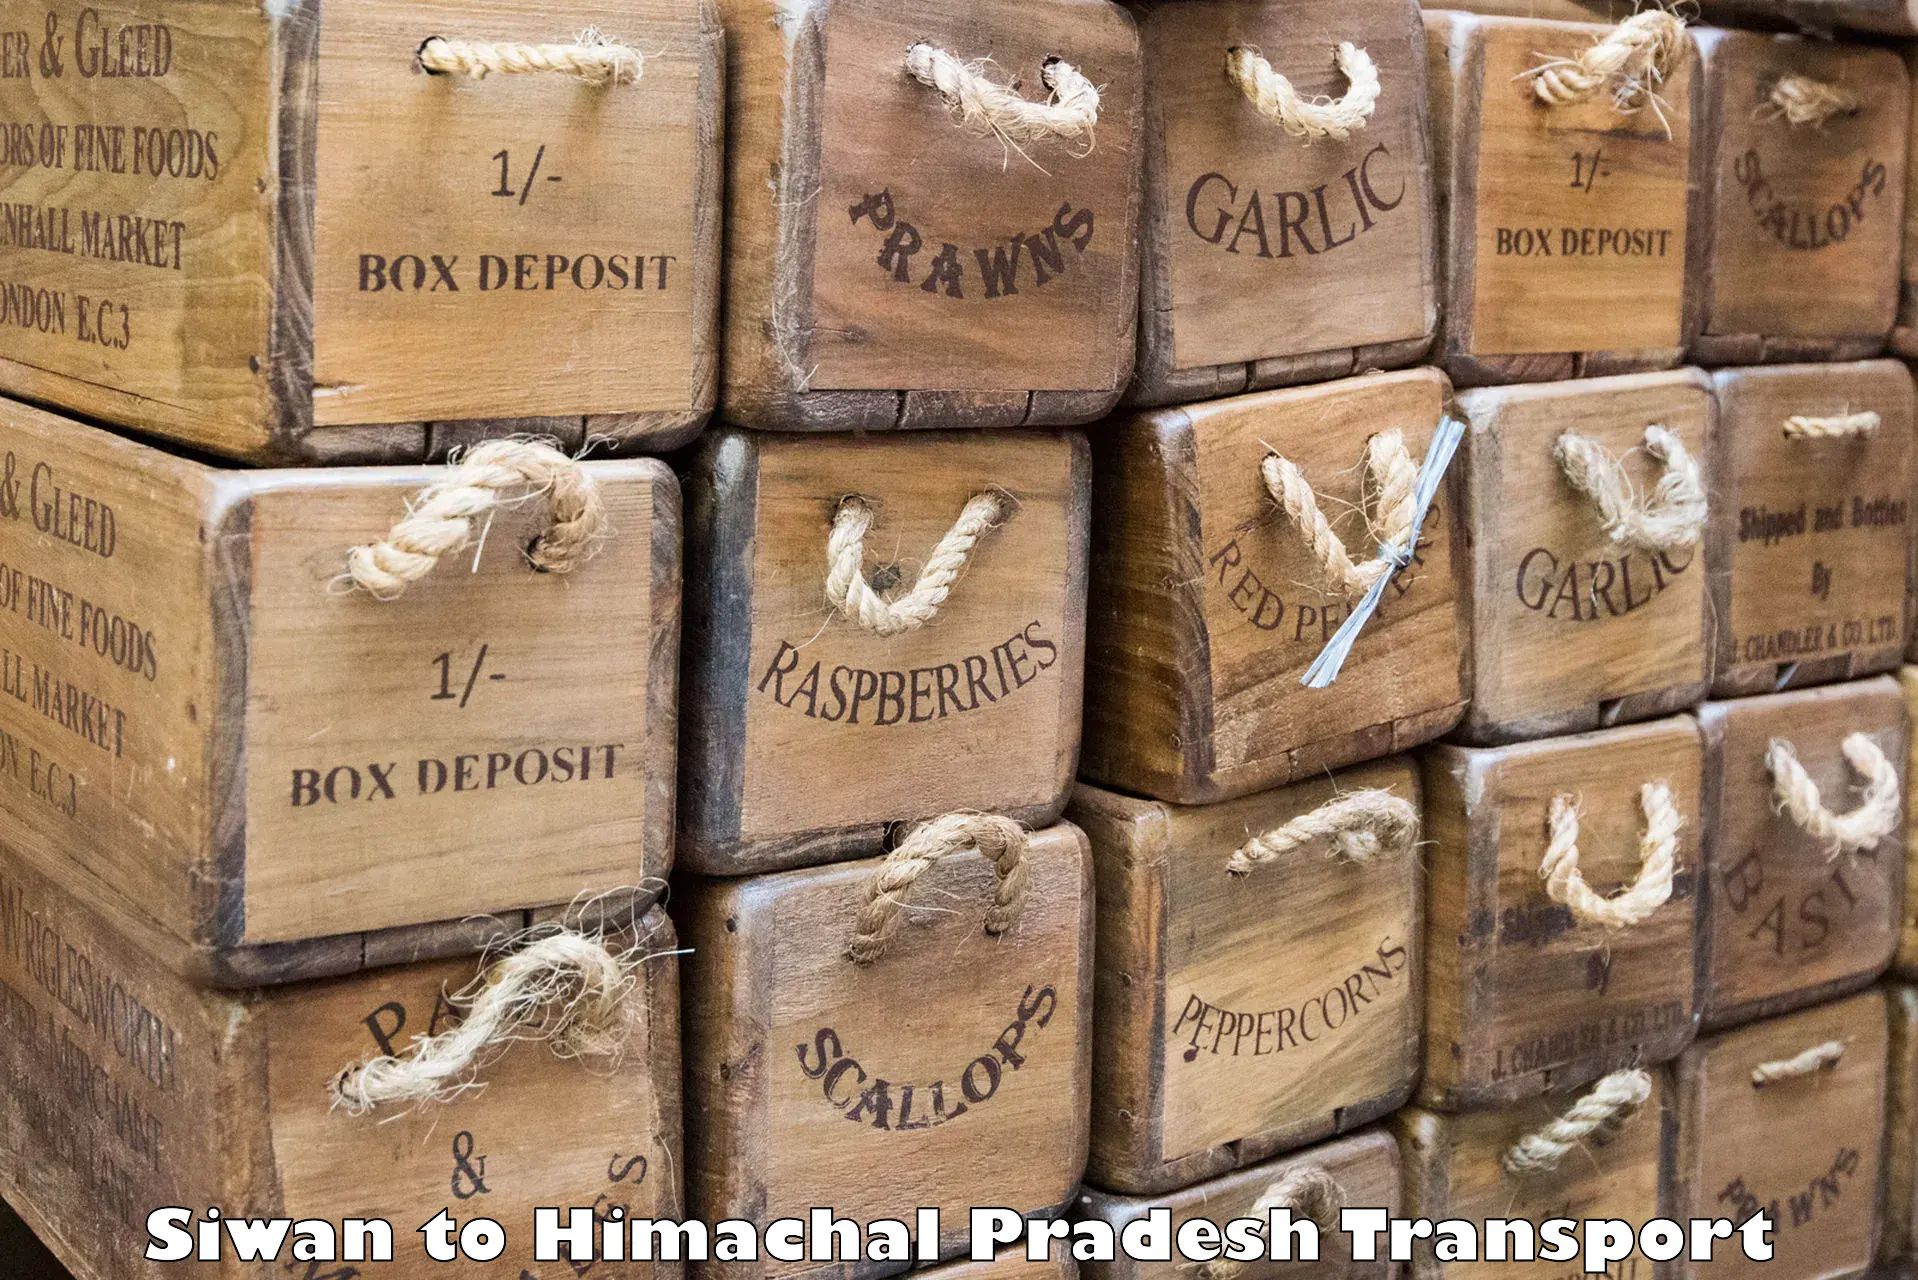 Commercial transport service Siwan to Dharamshala